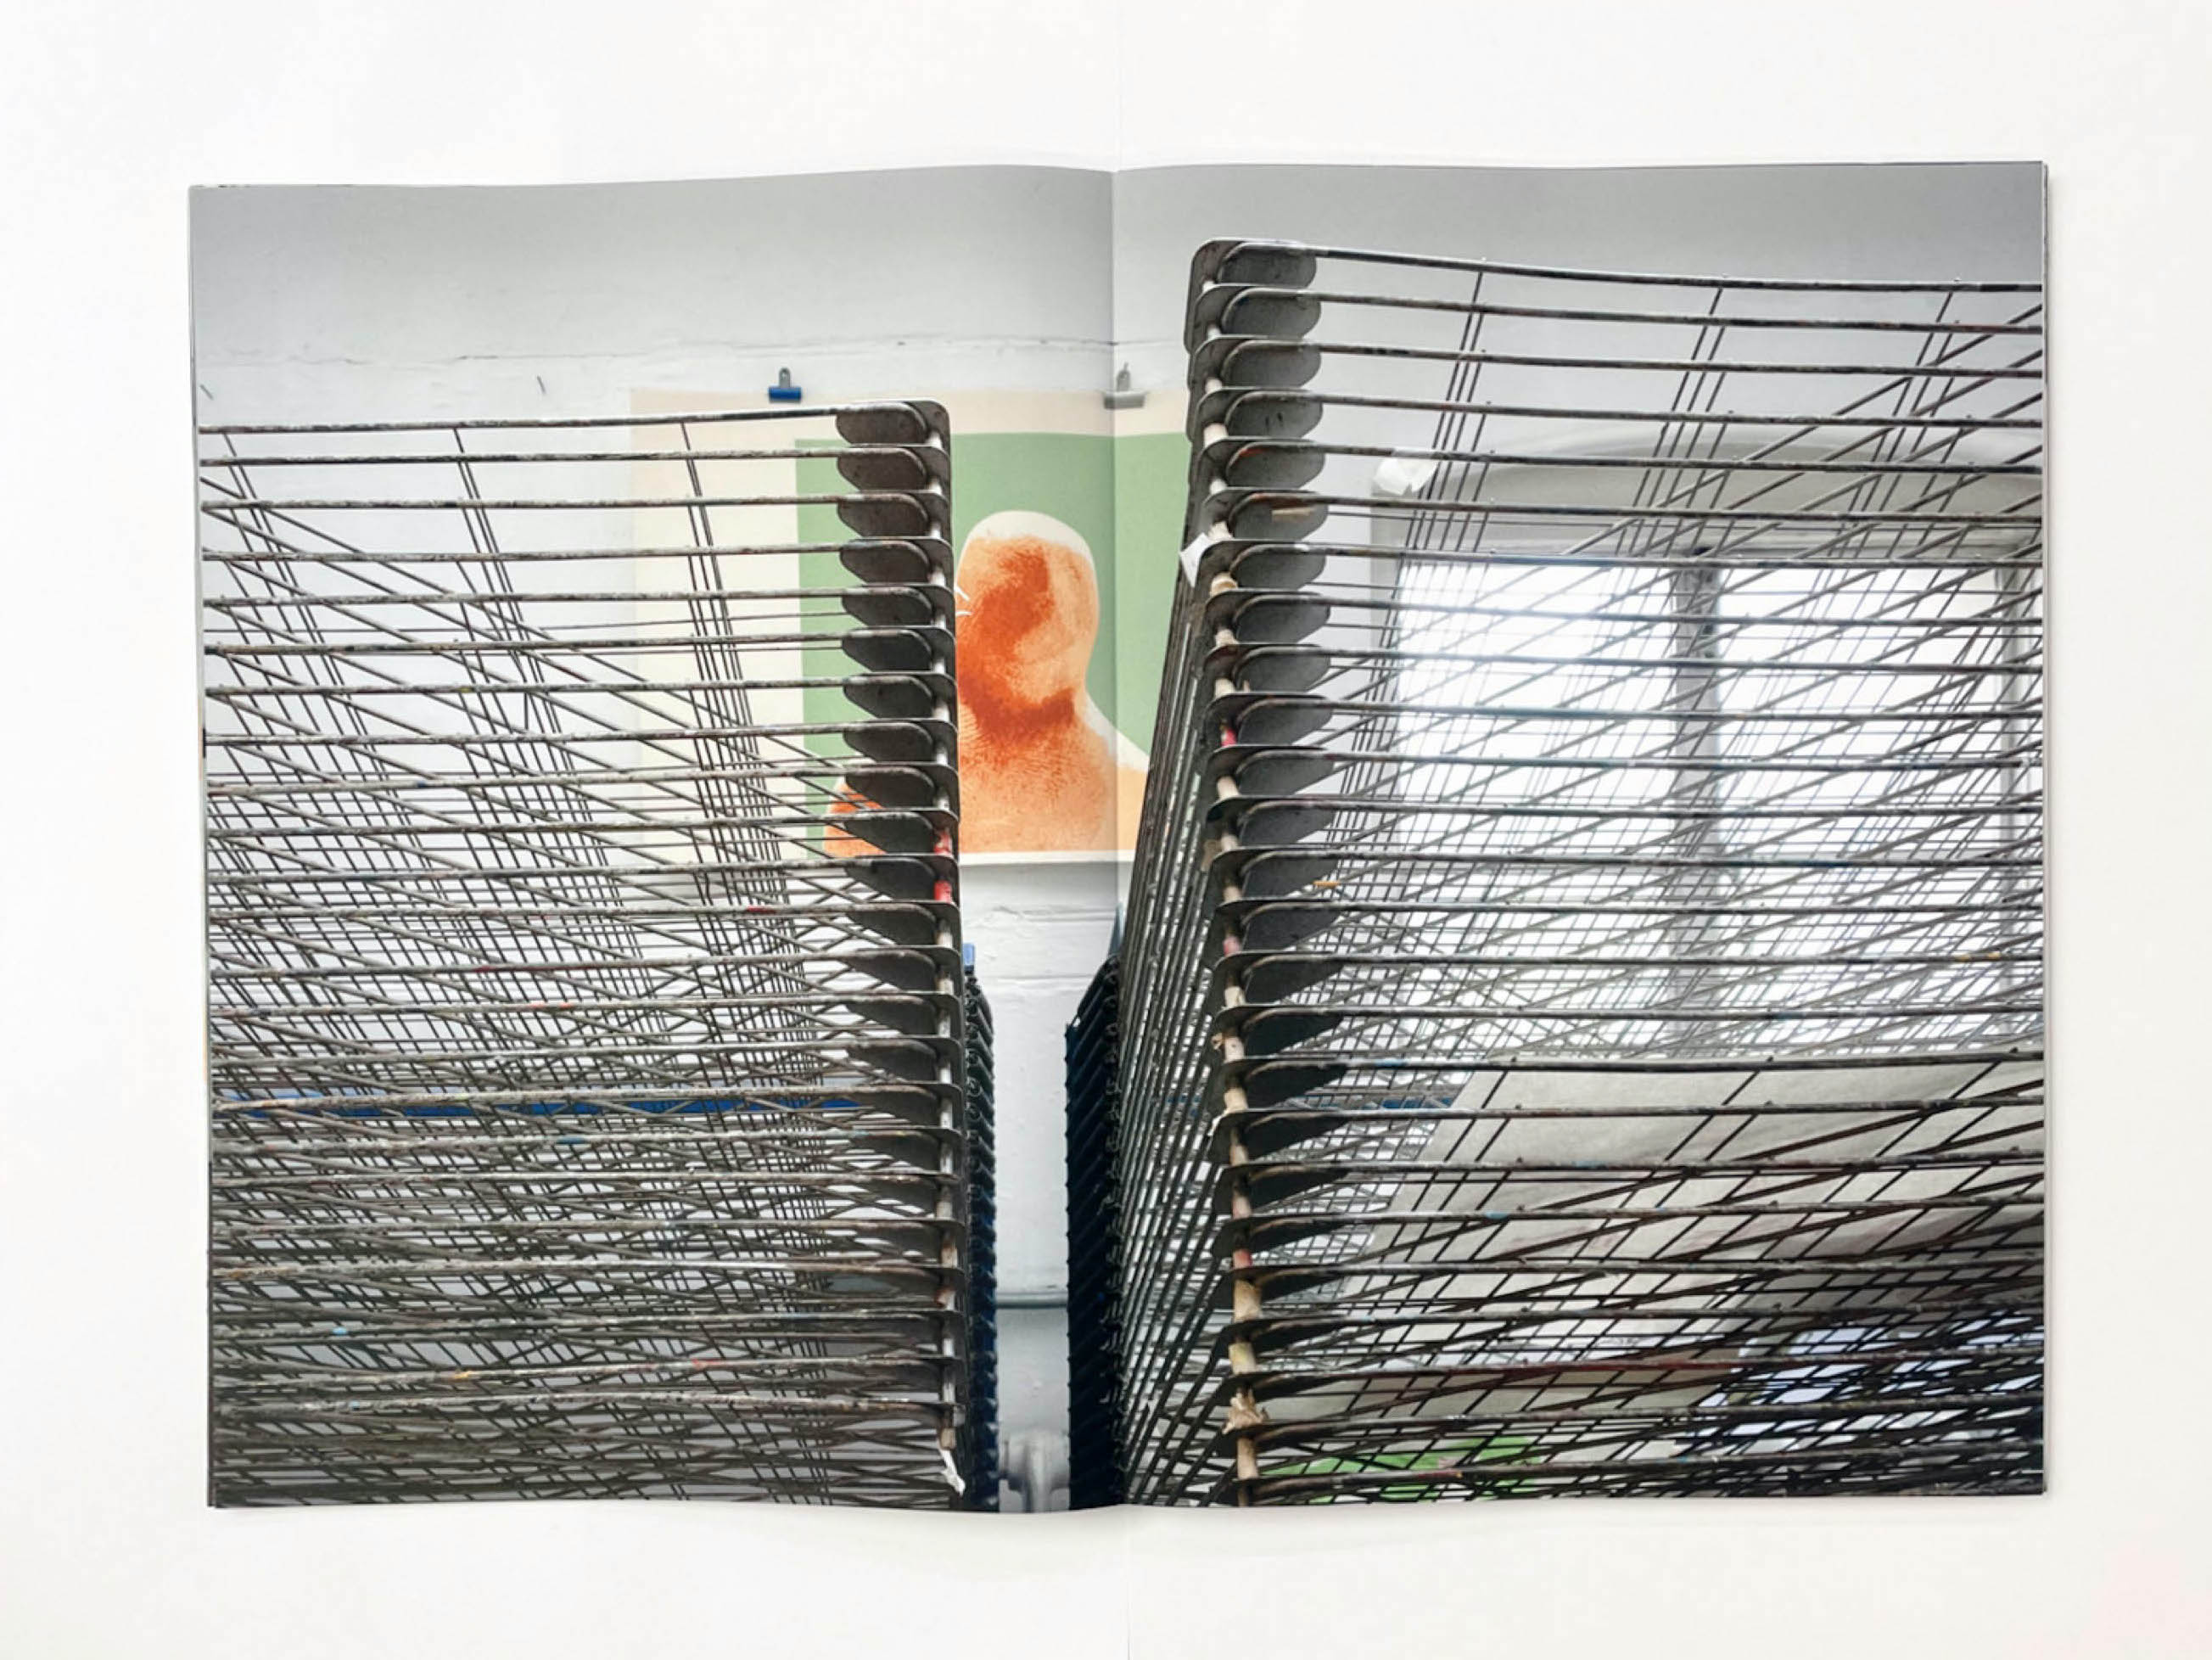 in between two wire drying racks an orange and green print of a head and shoulders without features is stuck to a white wall